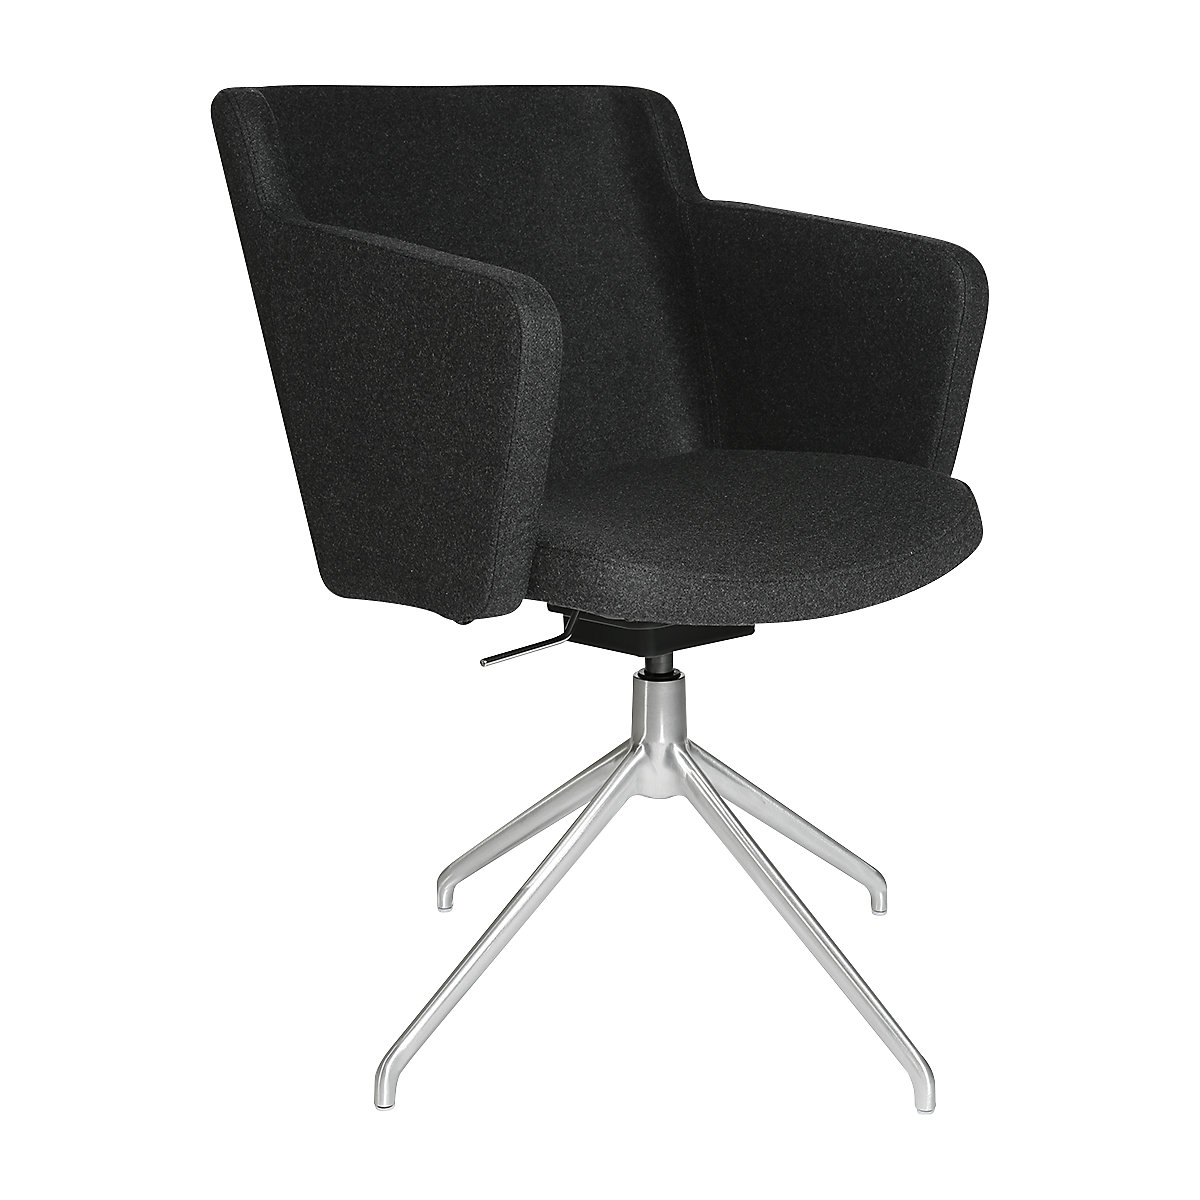 SFH visitors’ chair – Topstar, 3D seat joint and aluminium five star base, charcoal-12